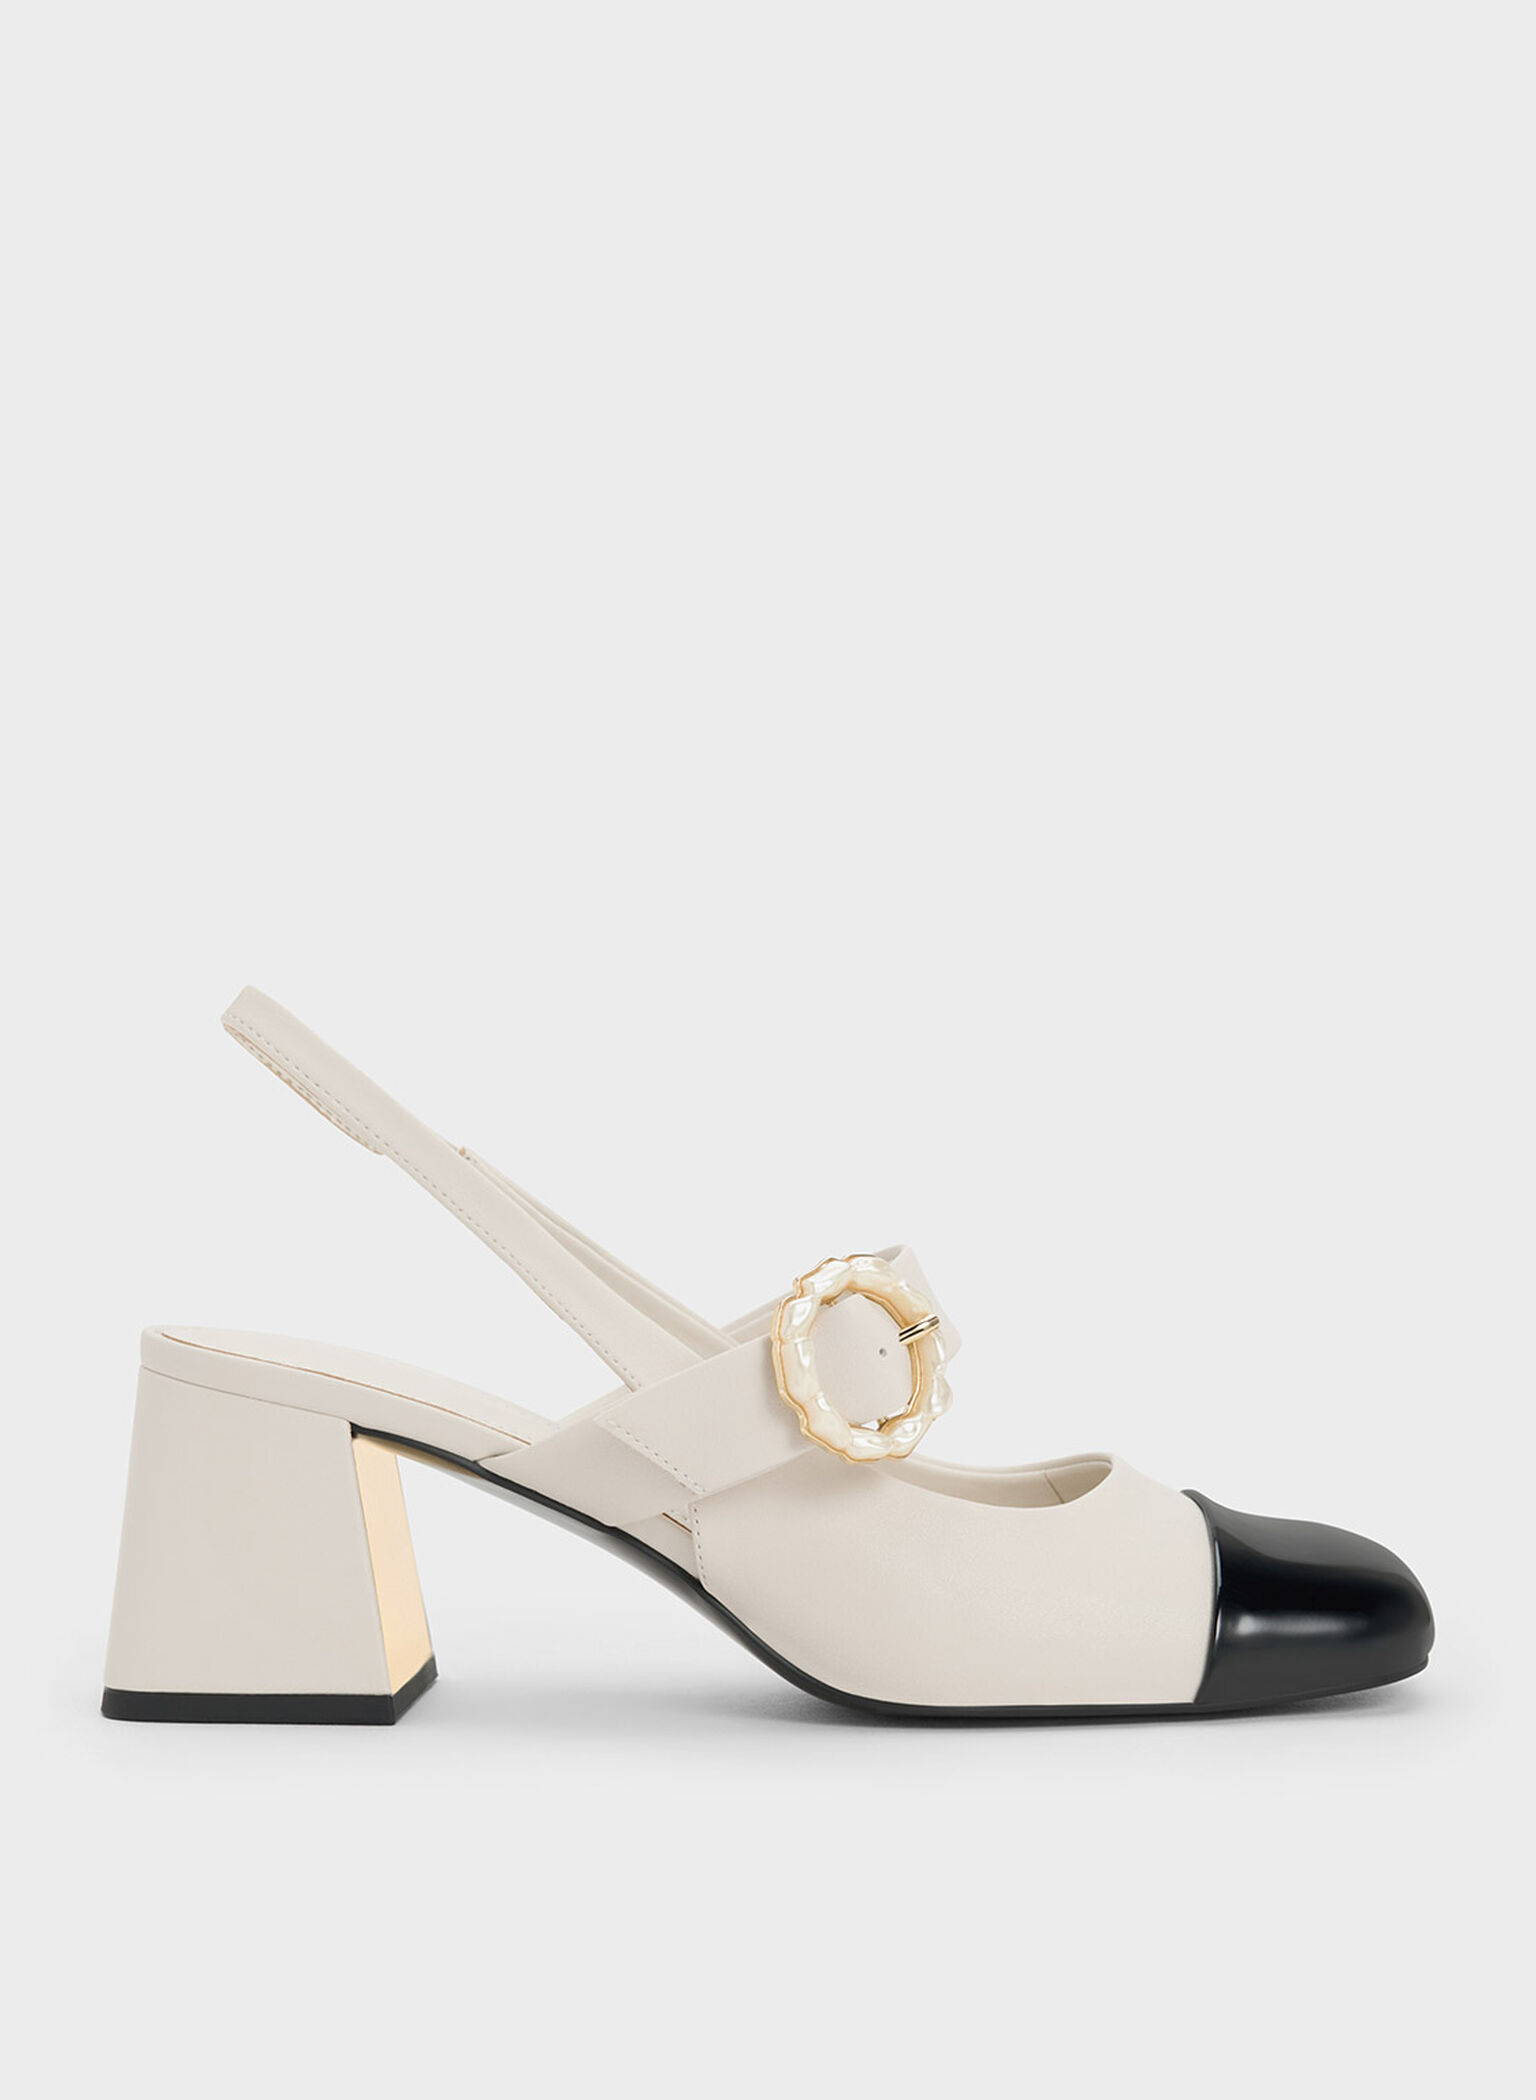 Charles & Keith - Women's Patent Two-Tone Pearl Buckle Slingback Pumps, Multi, US 7